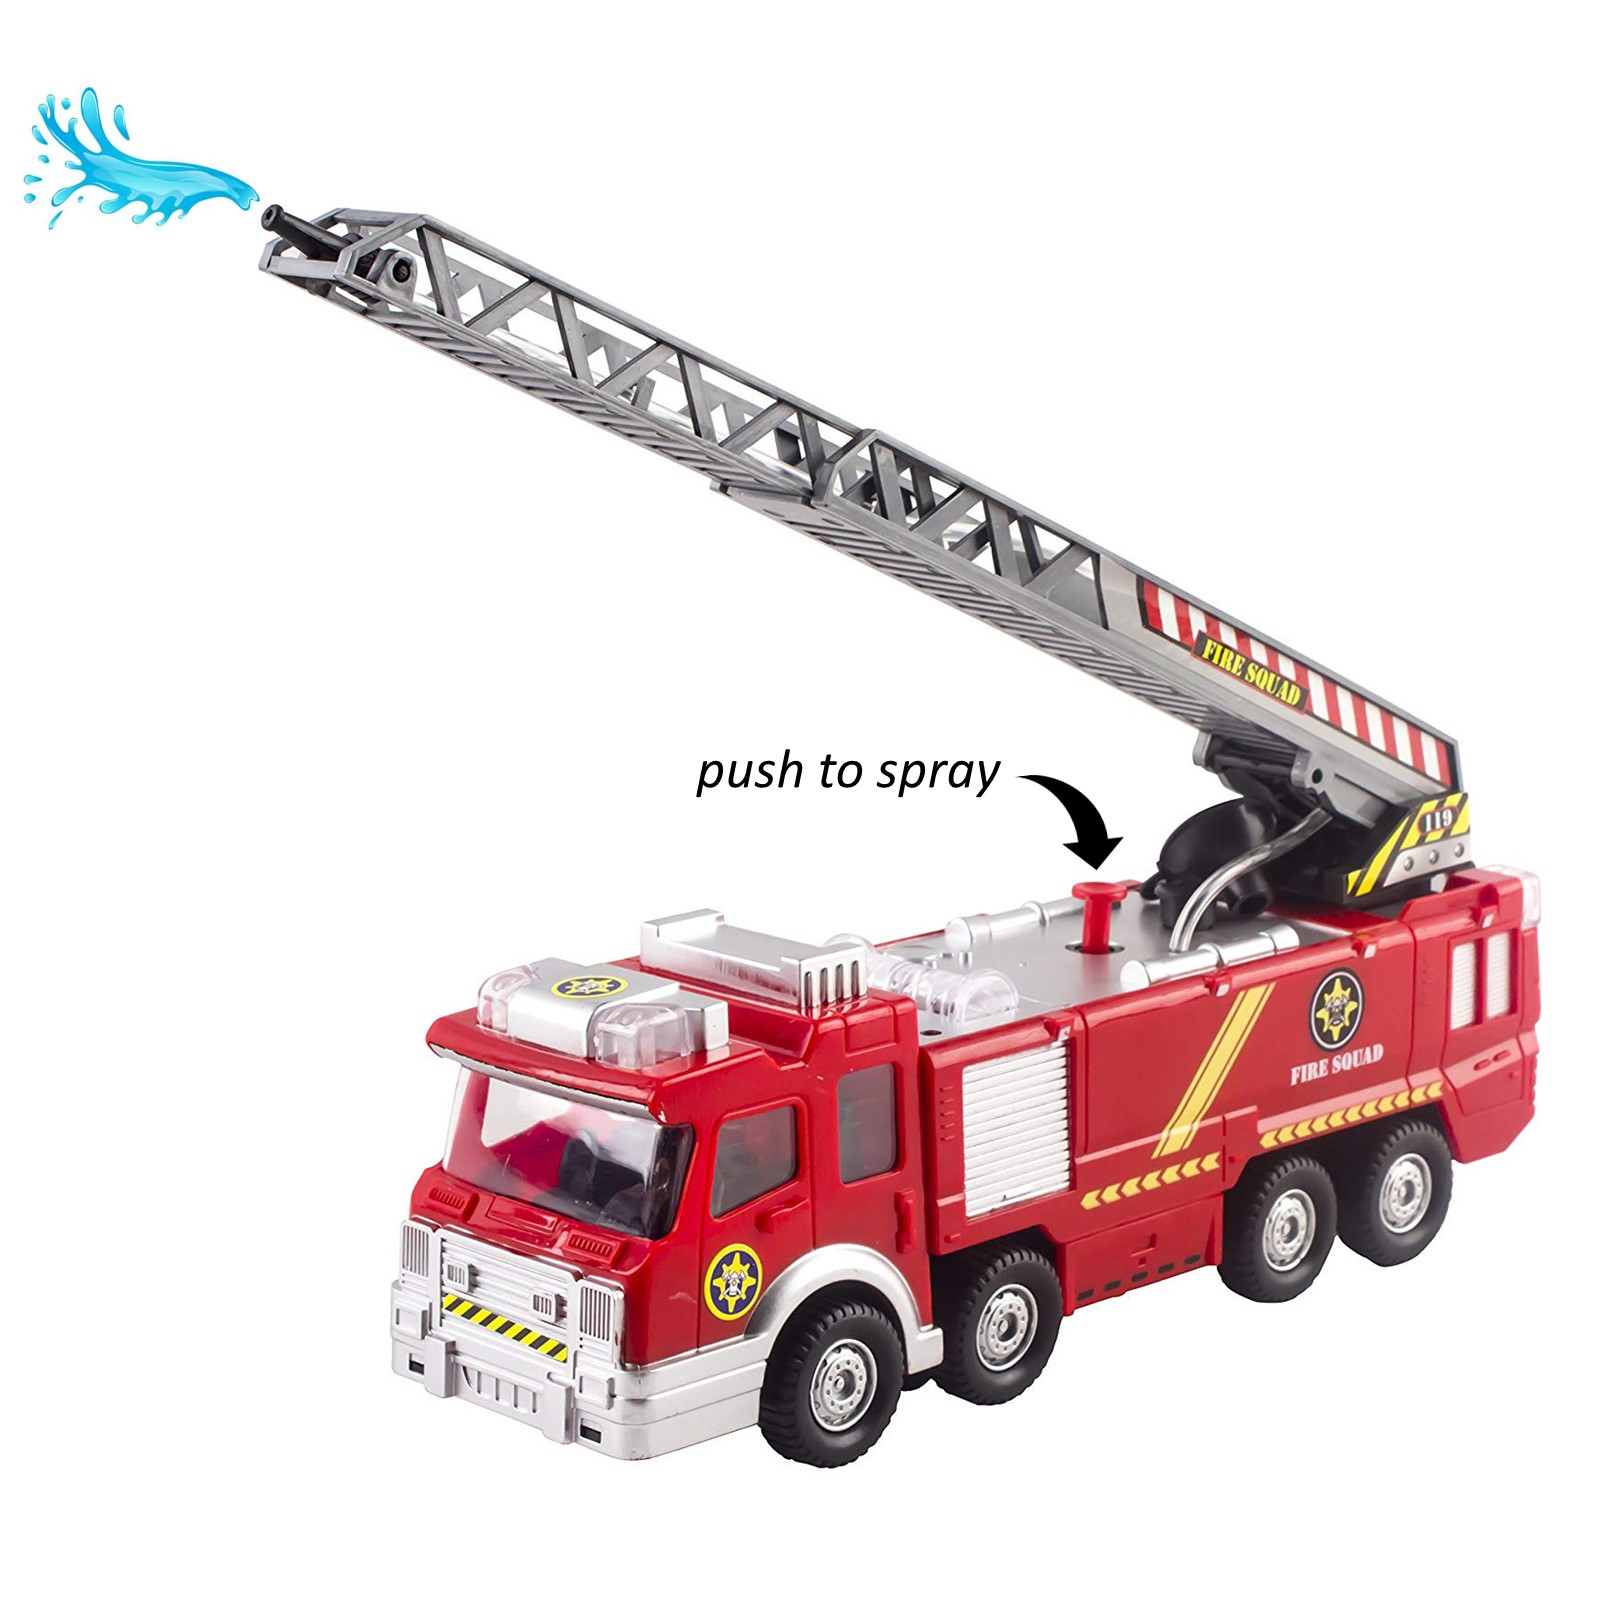 Fire Truck Toy Rescue With Shooting Water Flashing Lights and Siren Sounds Extending Ladder And Water Pump Hose That Shoots Water Perfect Bump And Go Action Firetruck for Boys Girls SY732